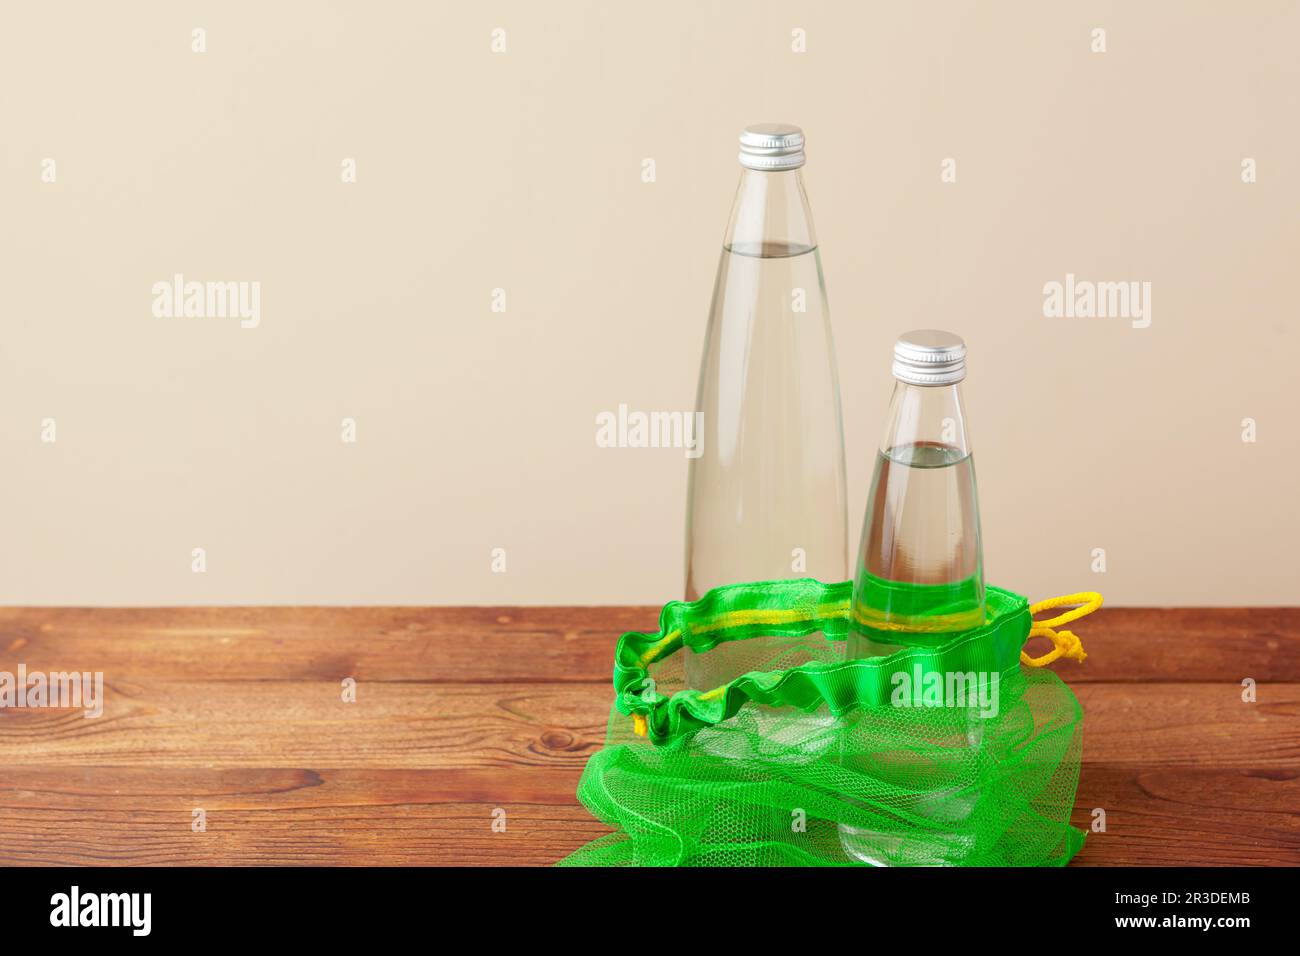 https://c8.alamy.com/comp/2R3DEMB/mesh-bags-with-reusable-glass-water-bottle-sustainable-lifestyle-zero-waste-concept-no-plastic-2R3DEMB.jpg